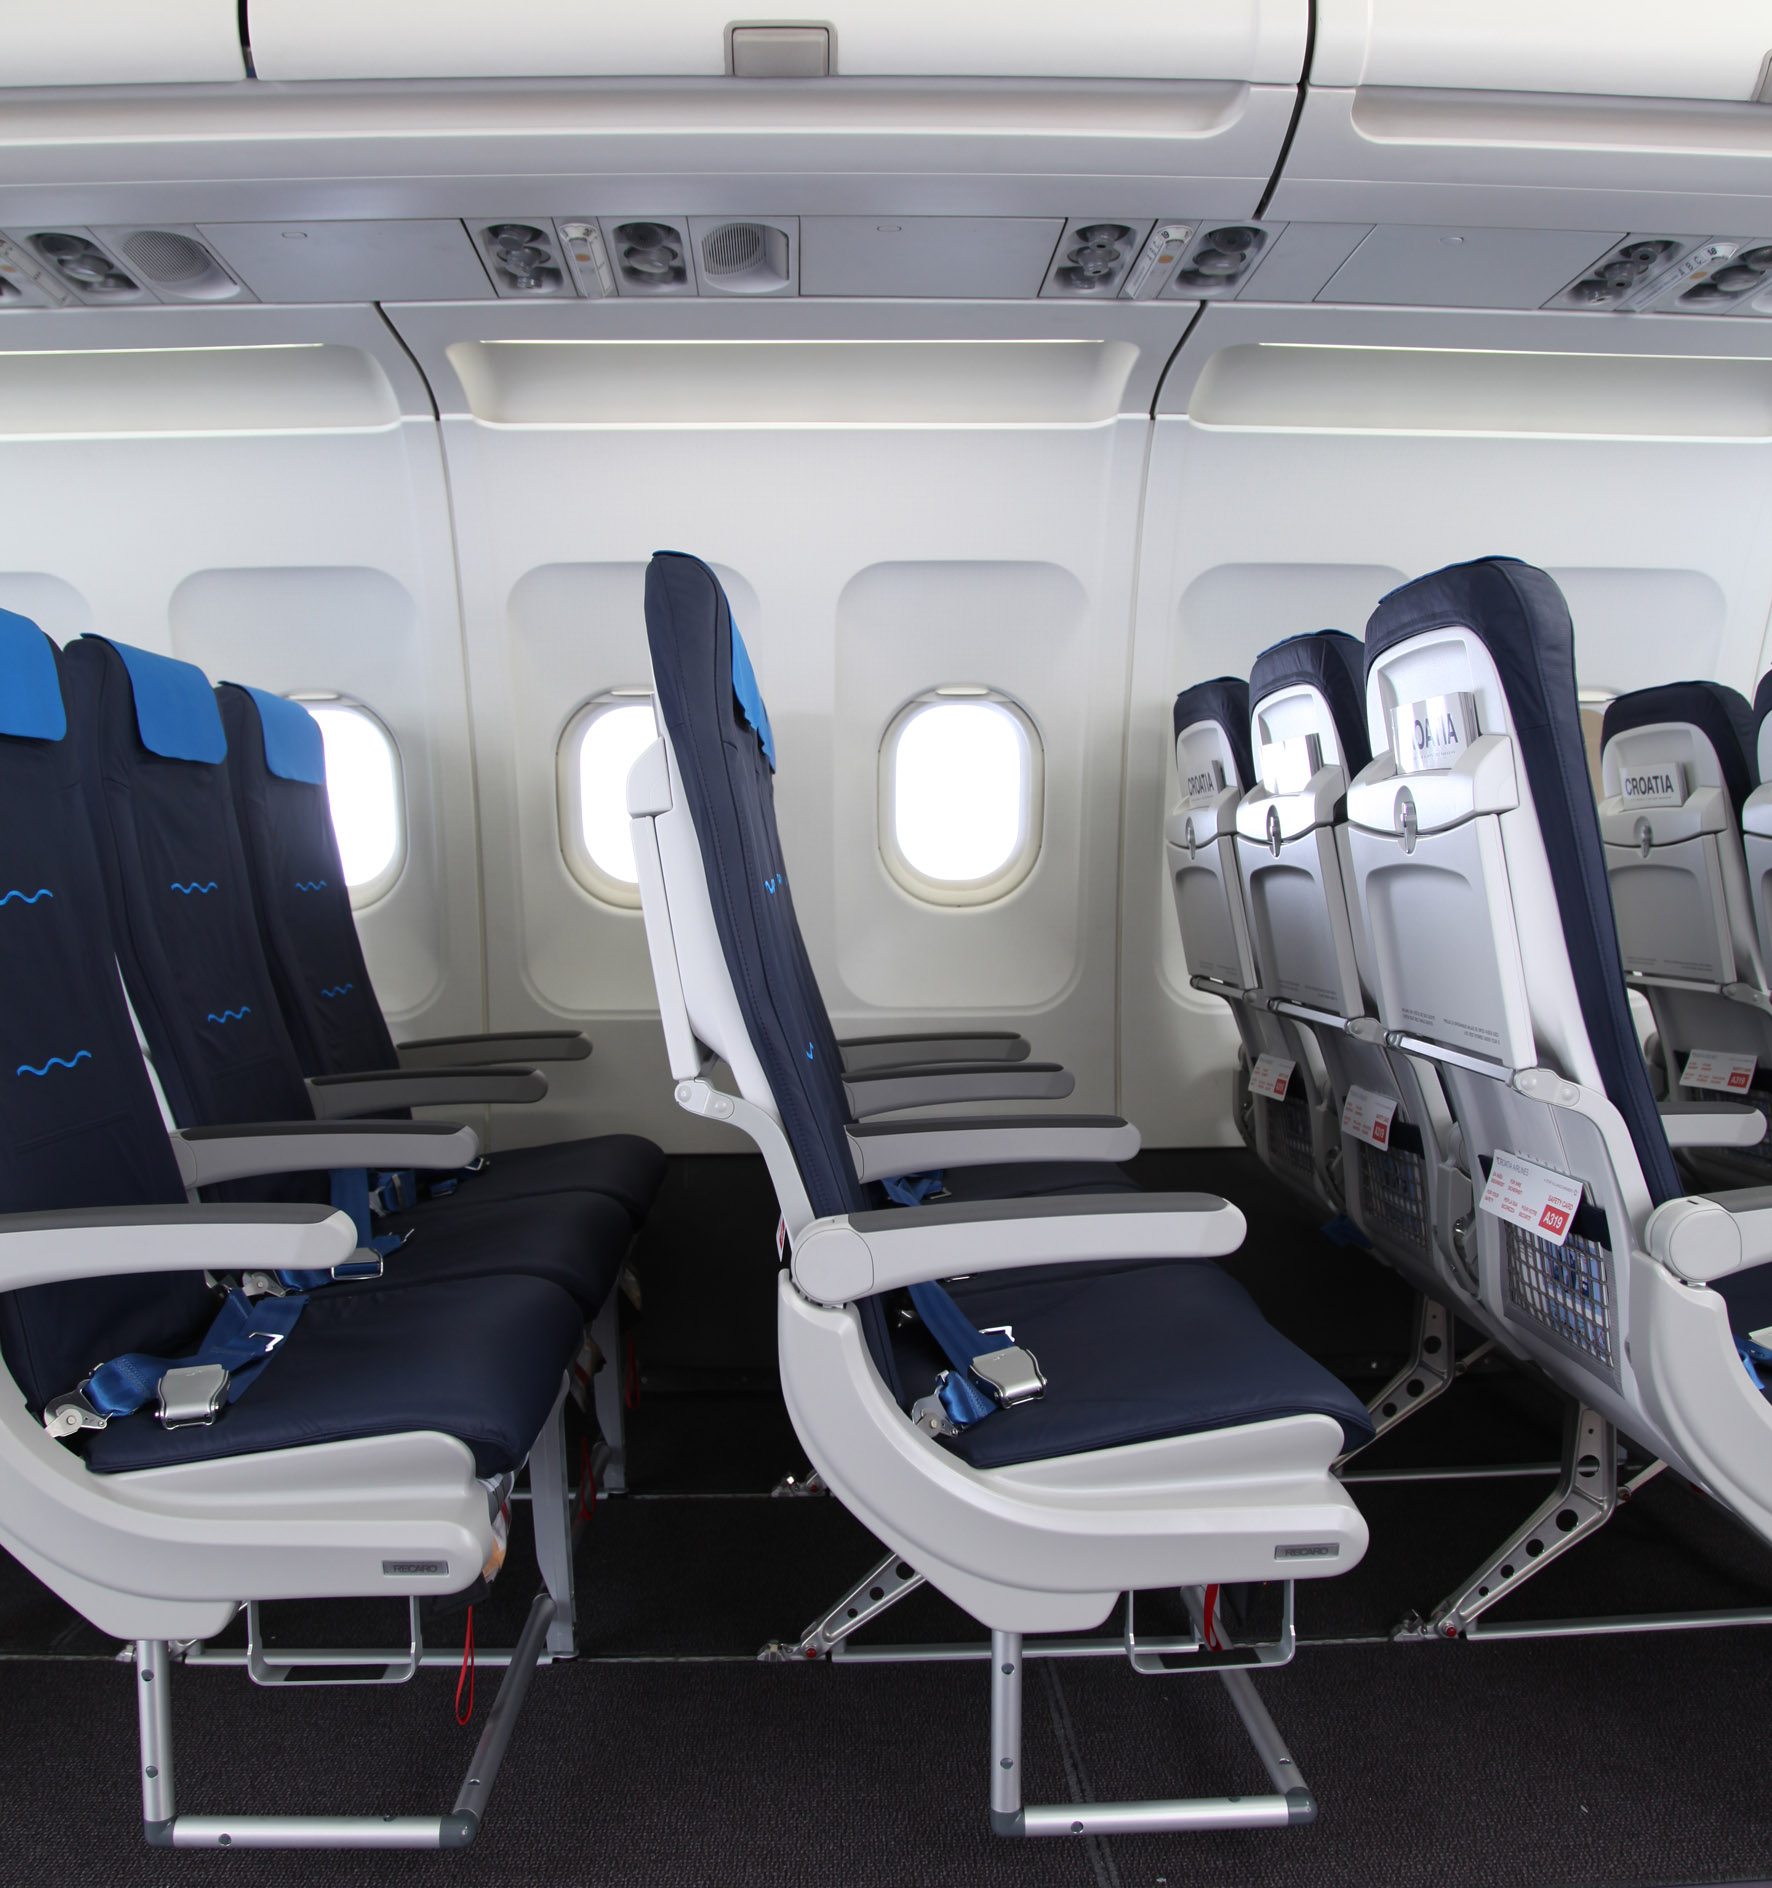 Airline seats; do we fit or is sitting in coach subjecting us to  potentially dangerous conditions? - Charschan Chiropractic in North  Brunswick, NJ and Scotch Plains, NJ